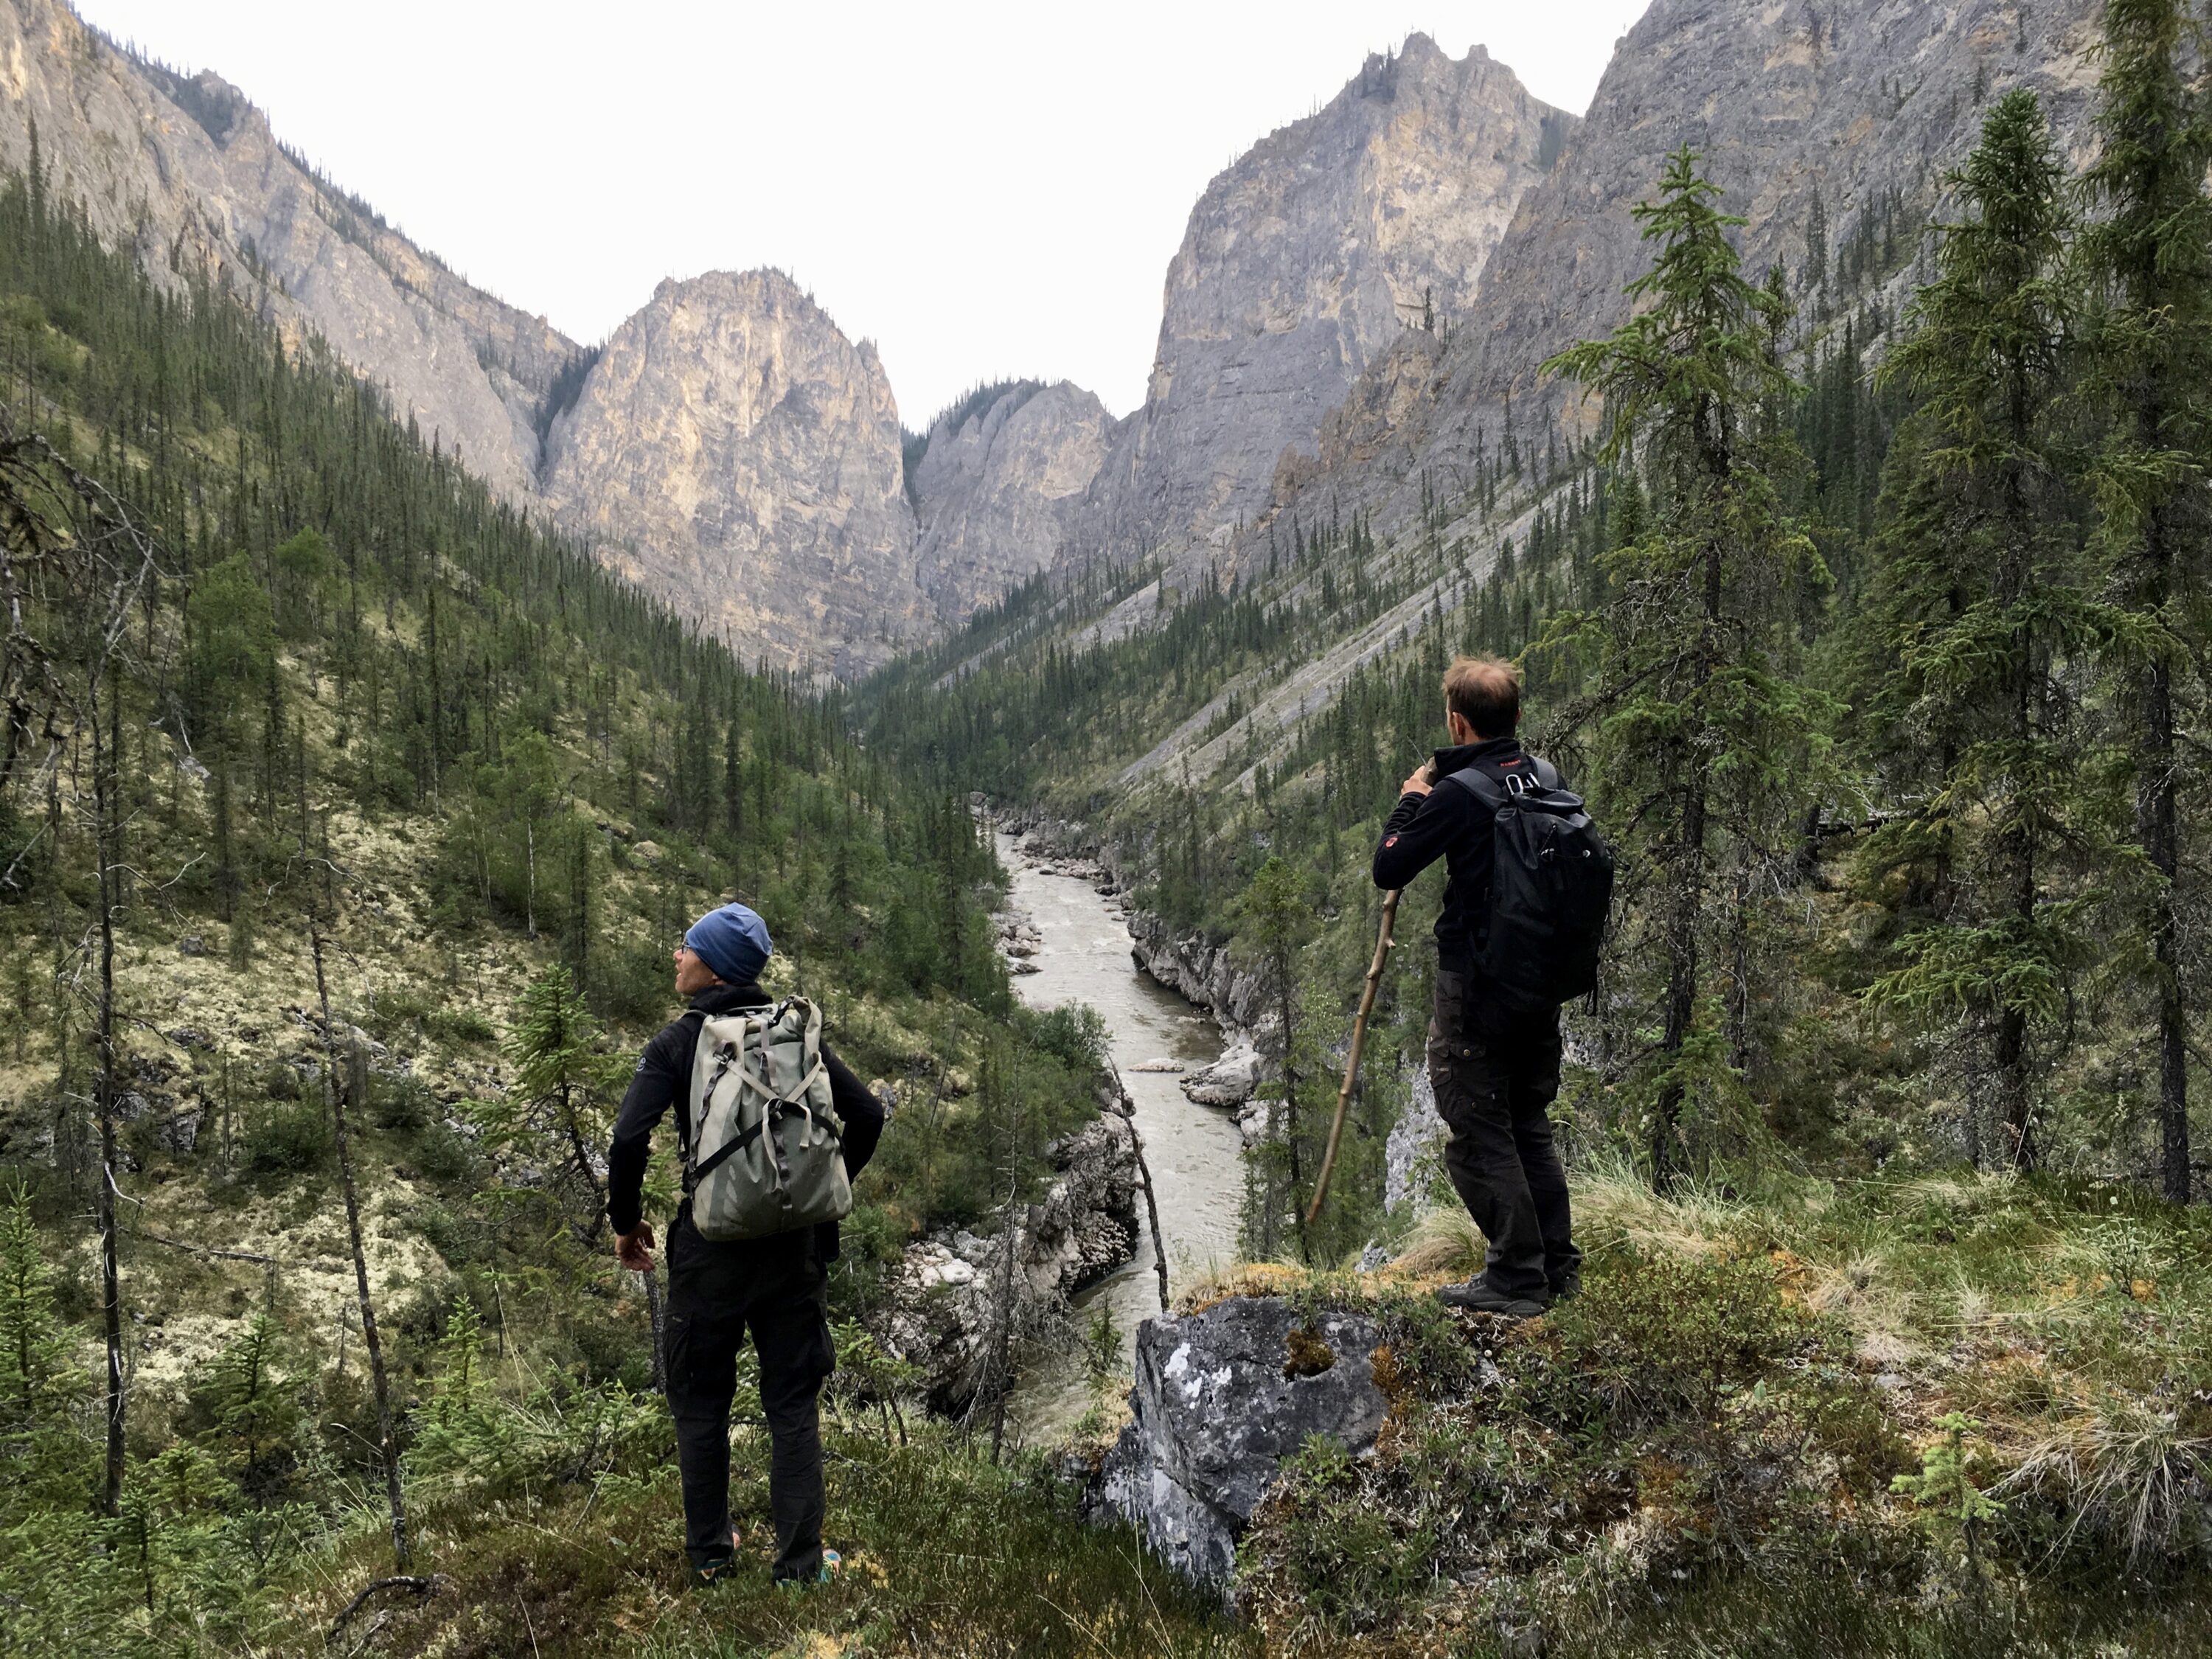 Oliver Armann and Ueli Staub take a moment to appreciate their surroundings and asses their next steps as they begin their portage through the Eye of the Needle Canyon.